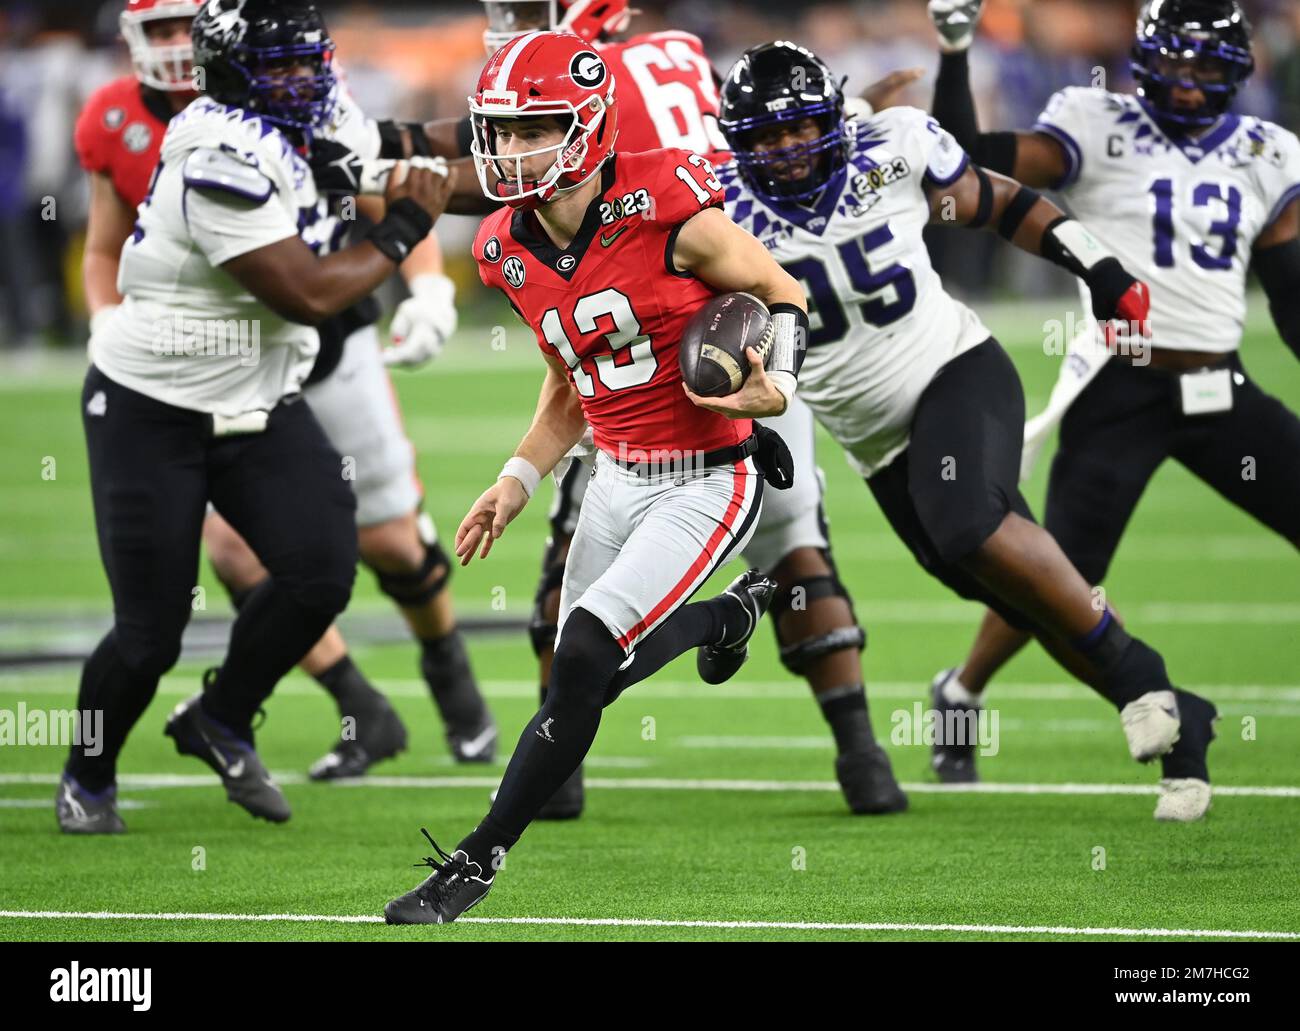 Inglewood, United States. 09th Jan, 2023. Georgia Bulldogs quarterback Stetson Bennett runs for a touchdown in the first quarter against the TCU Horned Frogs at the 2023 NCAA College Football National Championship between Georgia and TCU at SoFi Stadium in Inglewood, California, on Monday, January 9, 2023. Photo by Mike Goulding/UPI Credit: UPI/Alamy Live News Stock Photo